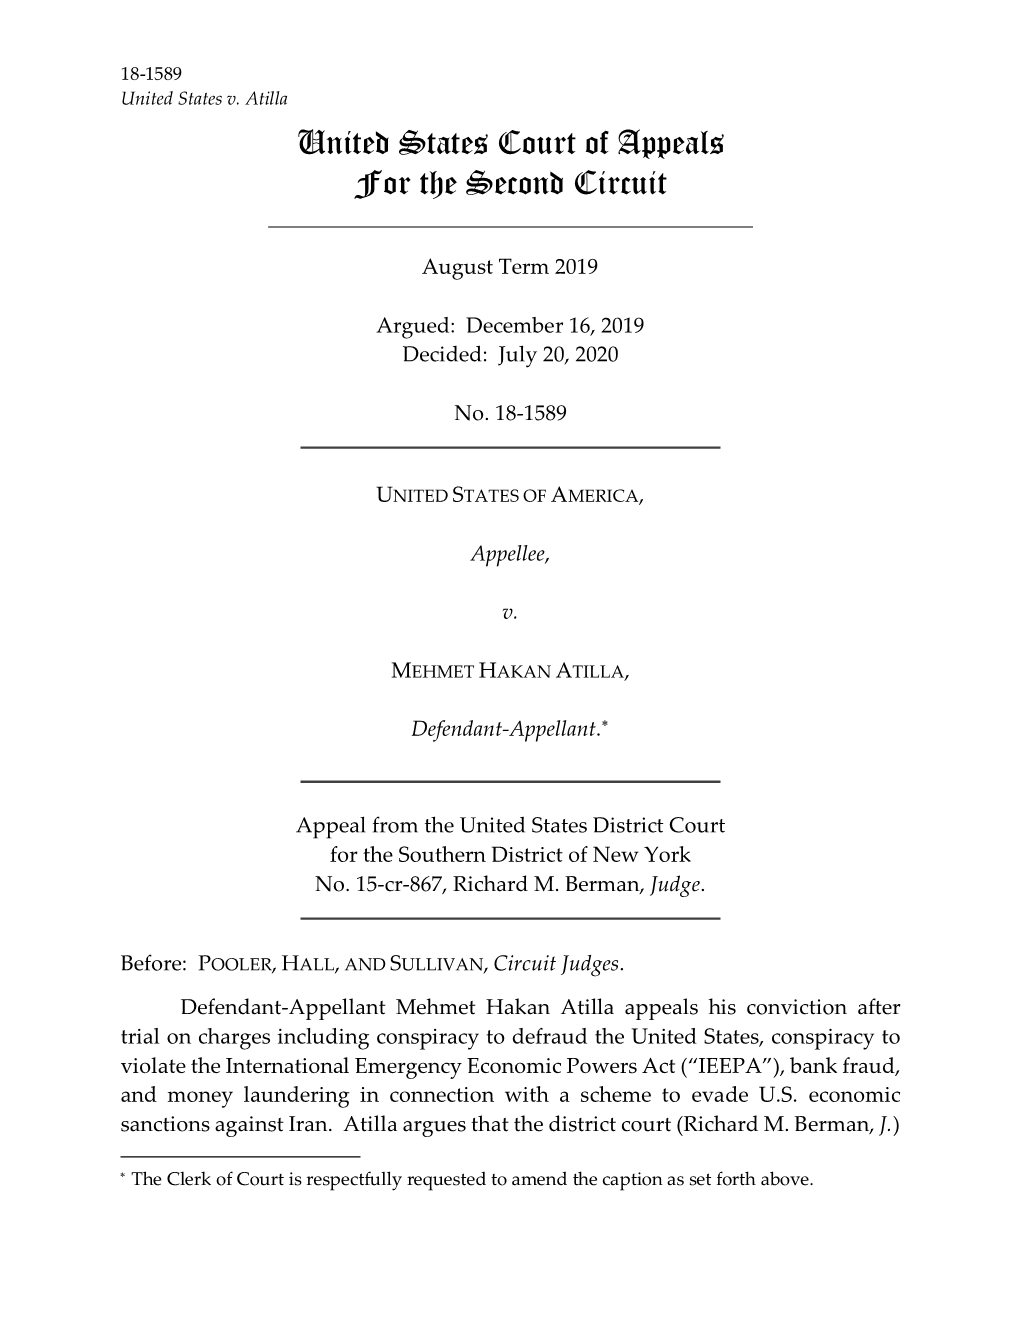 United States V. Atilla United States Court of Appeals for the Second Circuit